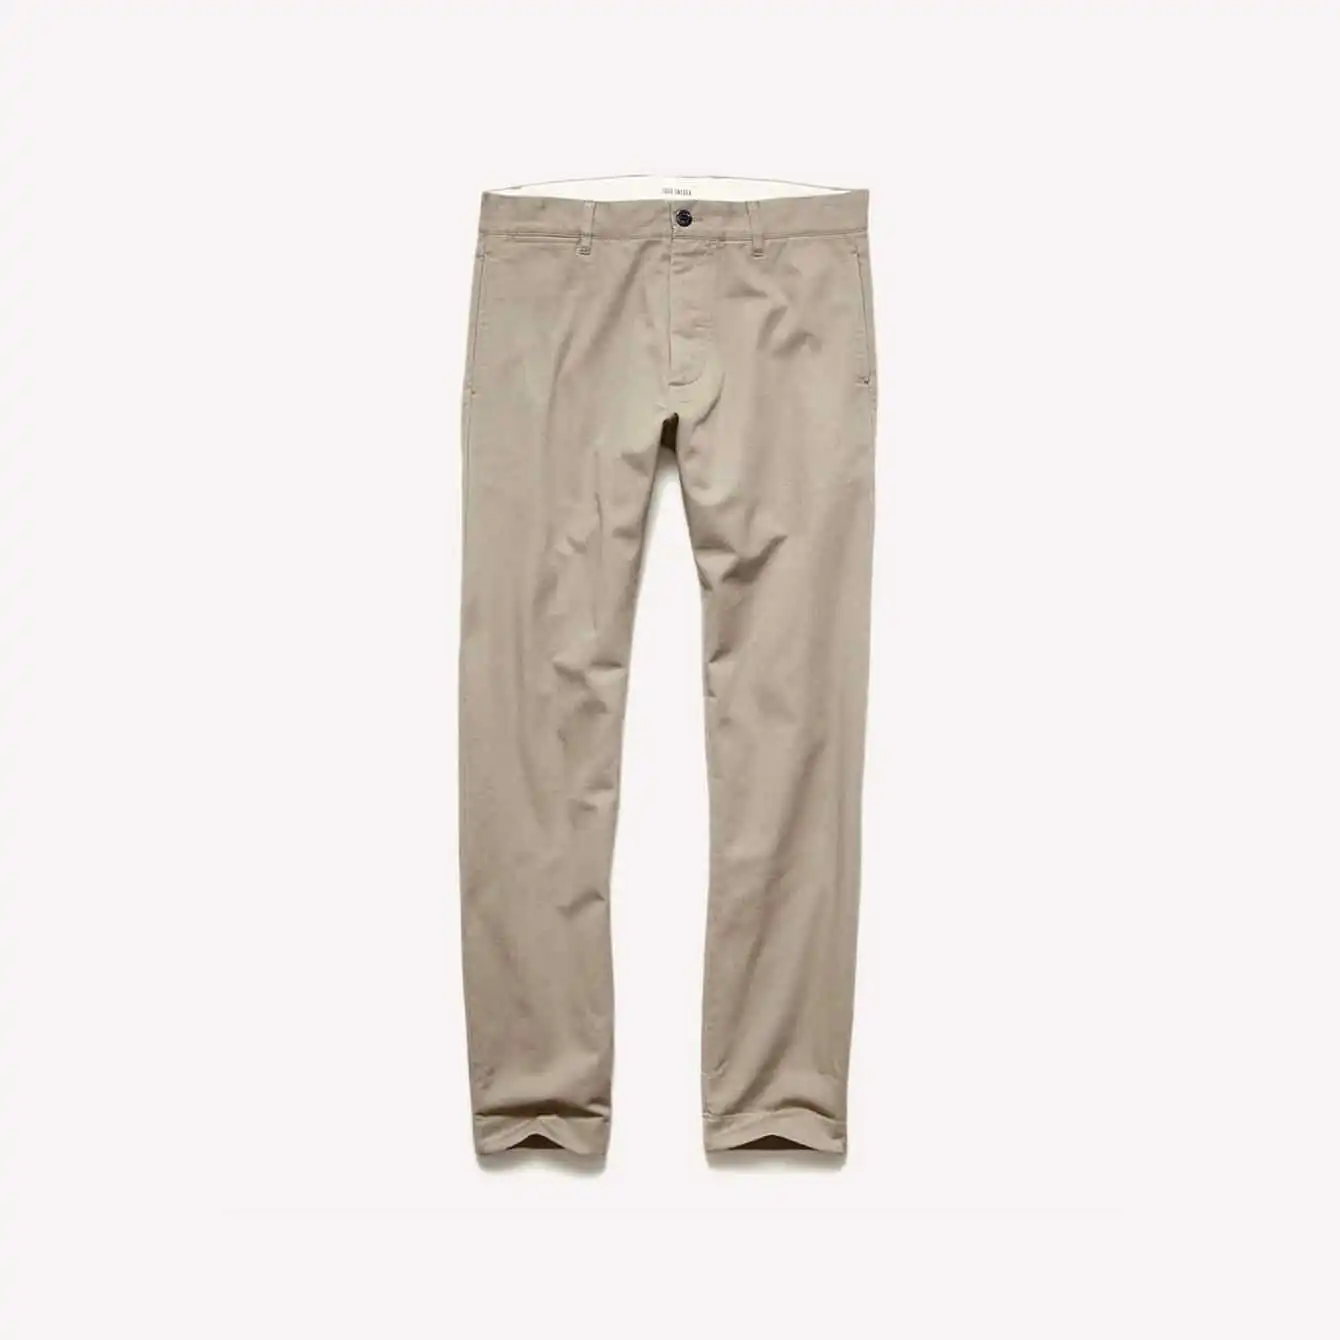 Todd Snyder - Japanese Selvedge Chino Pant